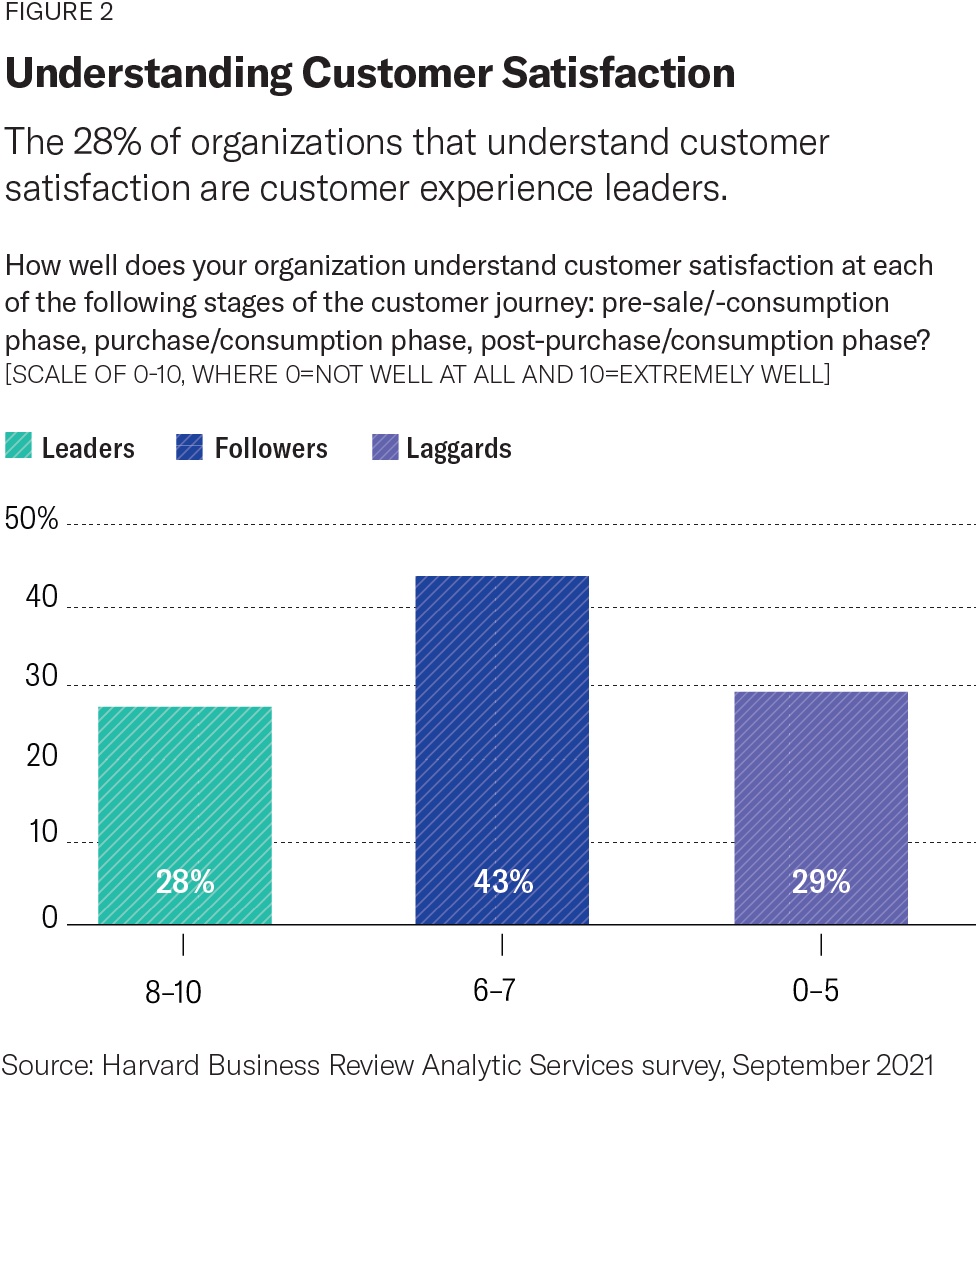 Bar chart of leaders, followers and laggards in understanding customer satisfaction for CX metrics